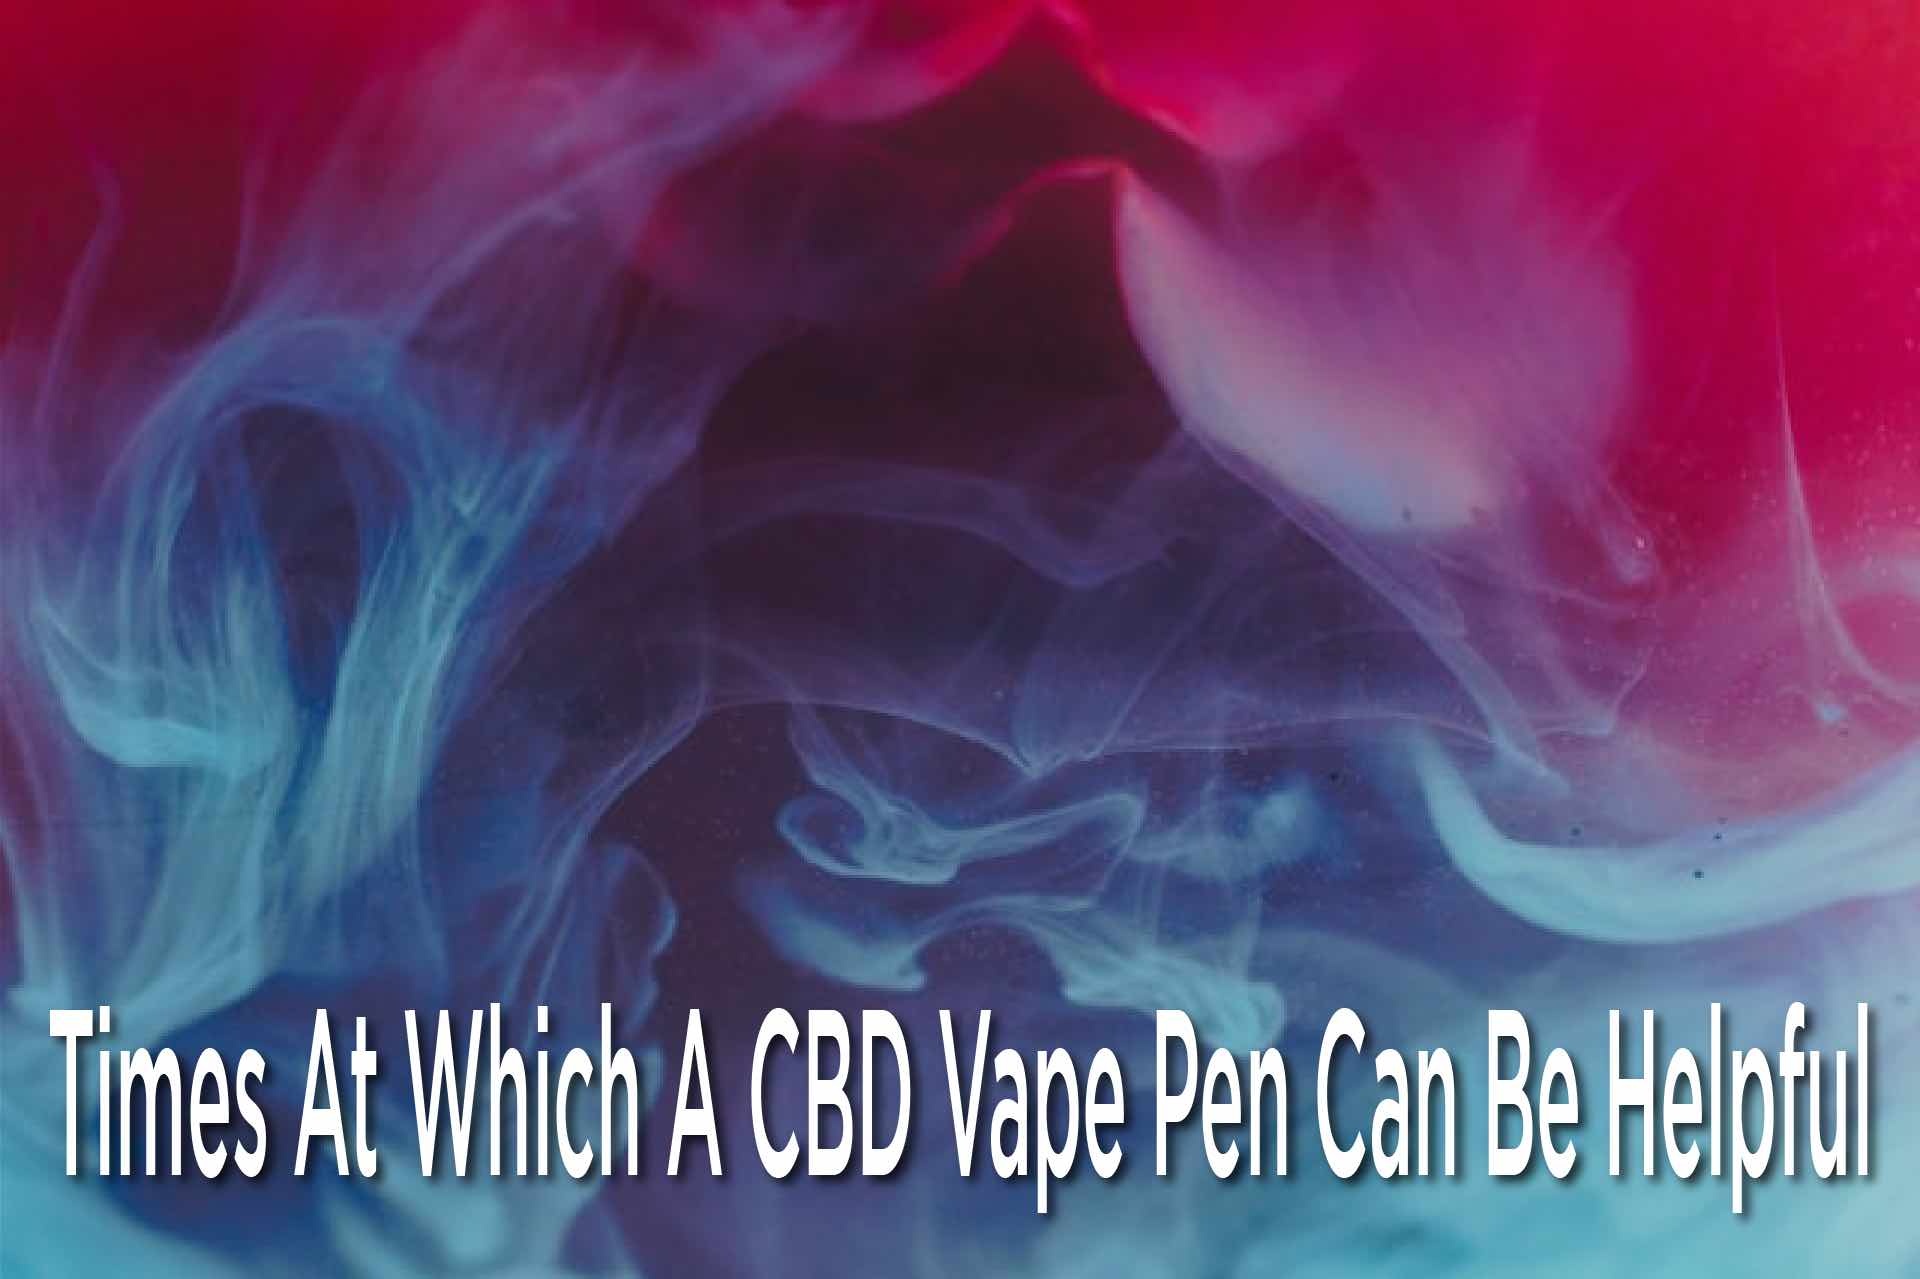 Times At Which A CBD Vape Pen Can Be Helpful